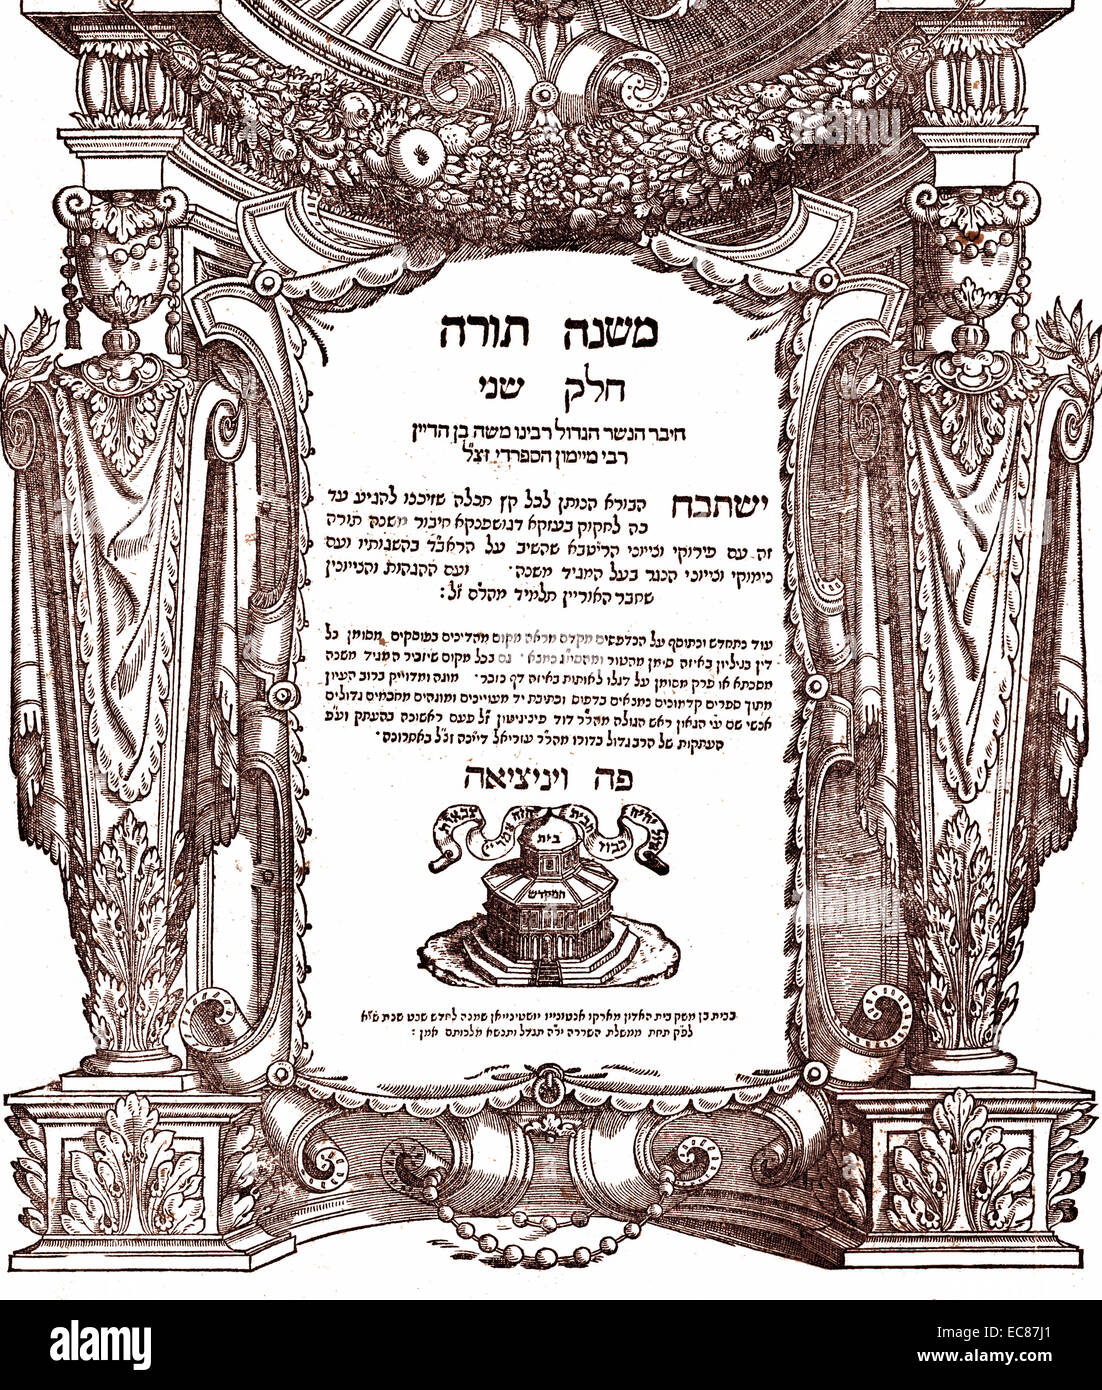 A 16th Century Mishneh by Mosheh Ben Maimon, preeminent medieval Arabizedd Spanish, Sephardic Jewish philosopher, astronomer and one of the most prolific and influential Torah Scholars and physicians of the Middle Ages. Dated 16th Century Stock Photo